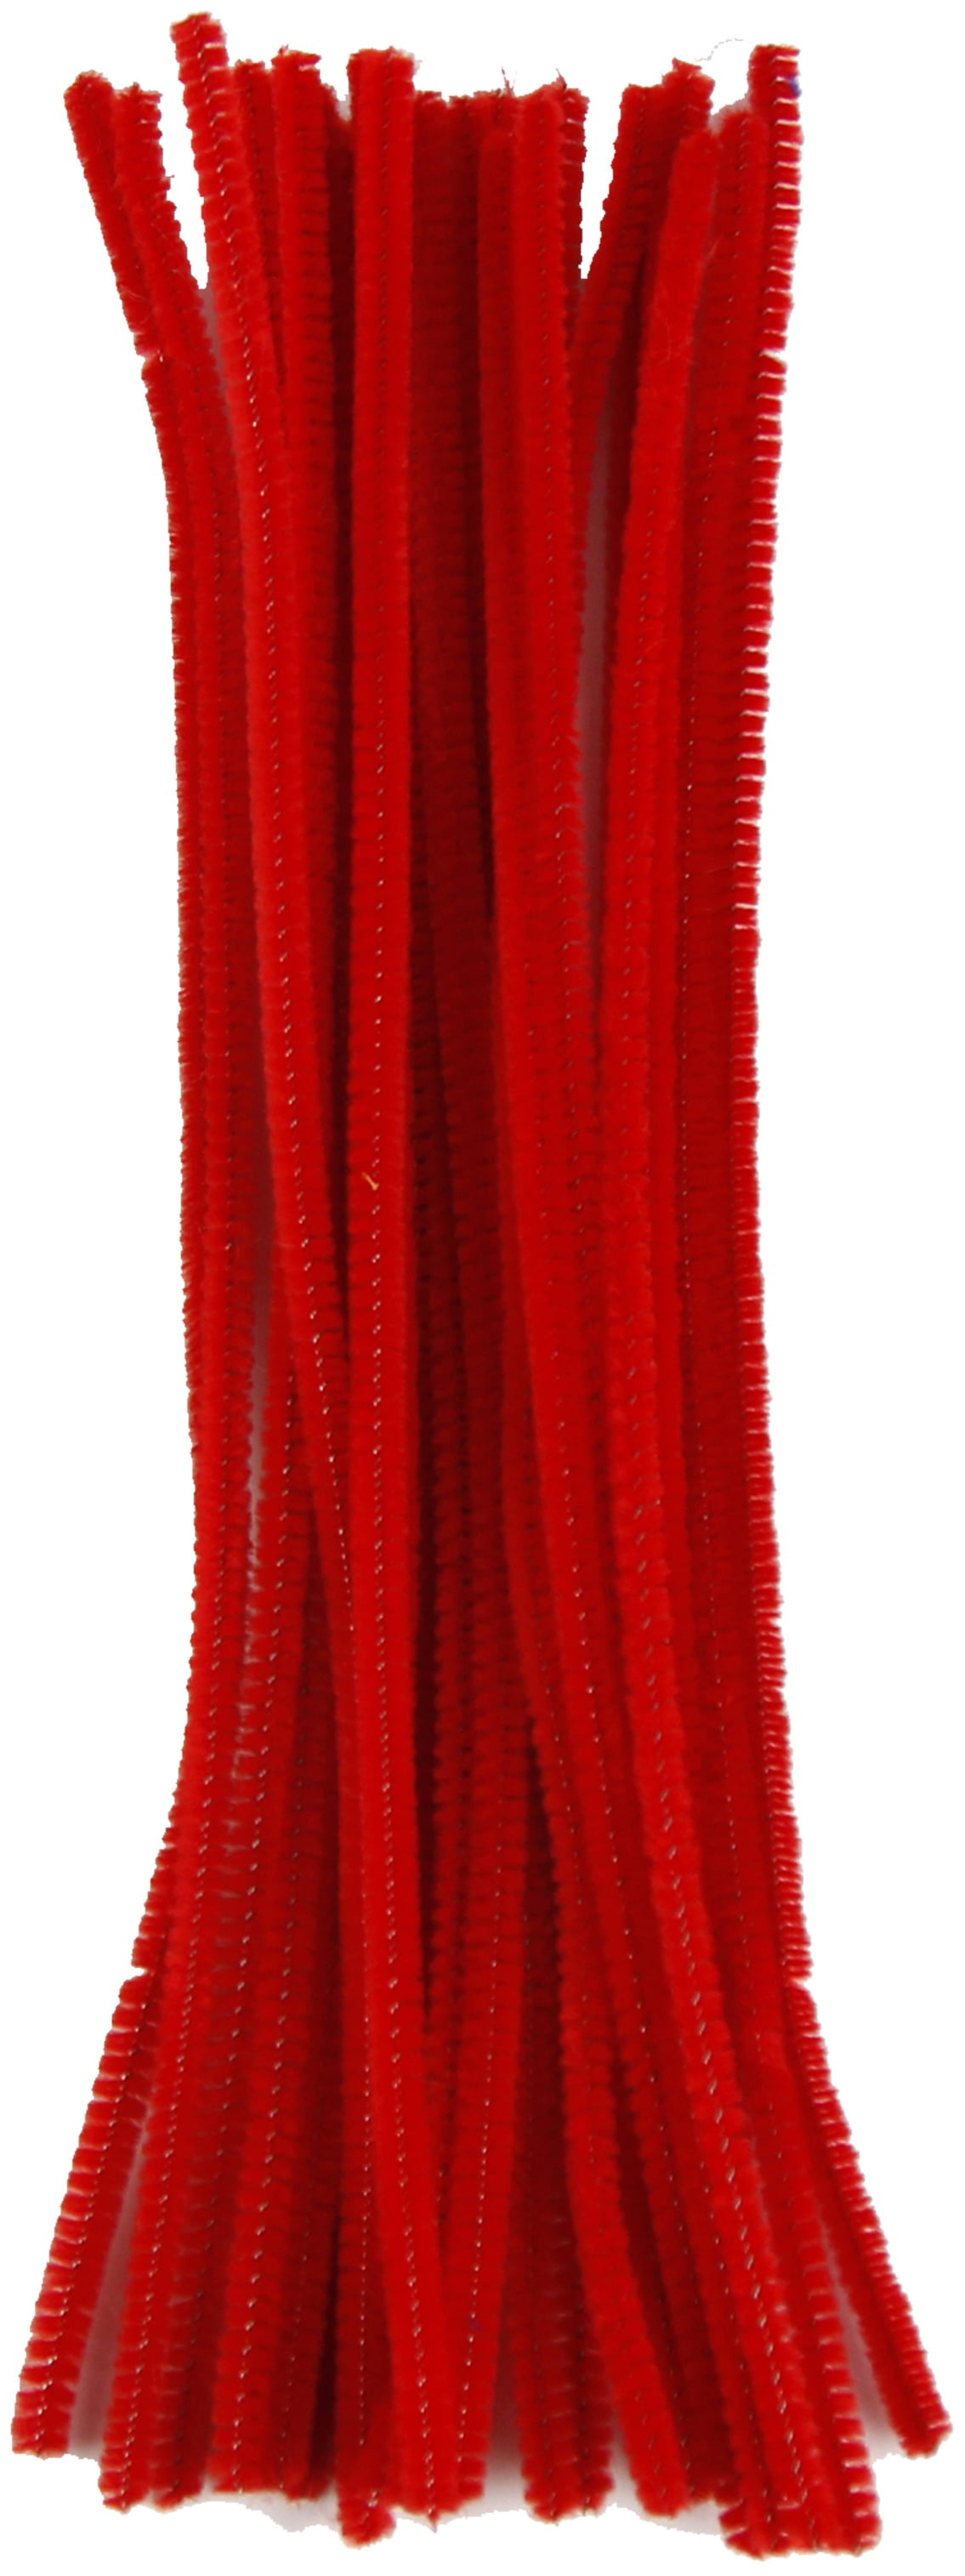 Red Chenille Pipe Cleaners - 25pk (300mm) : : Home